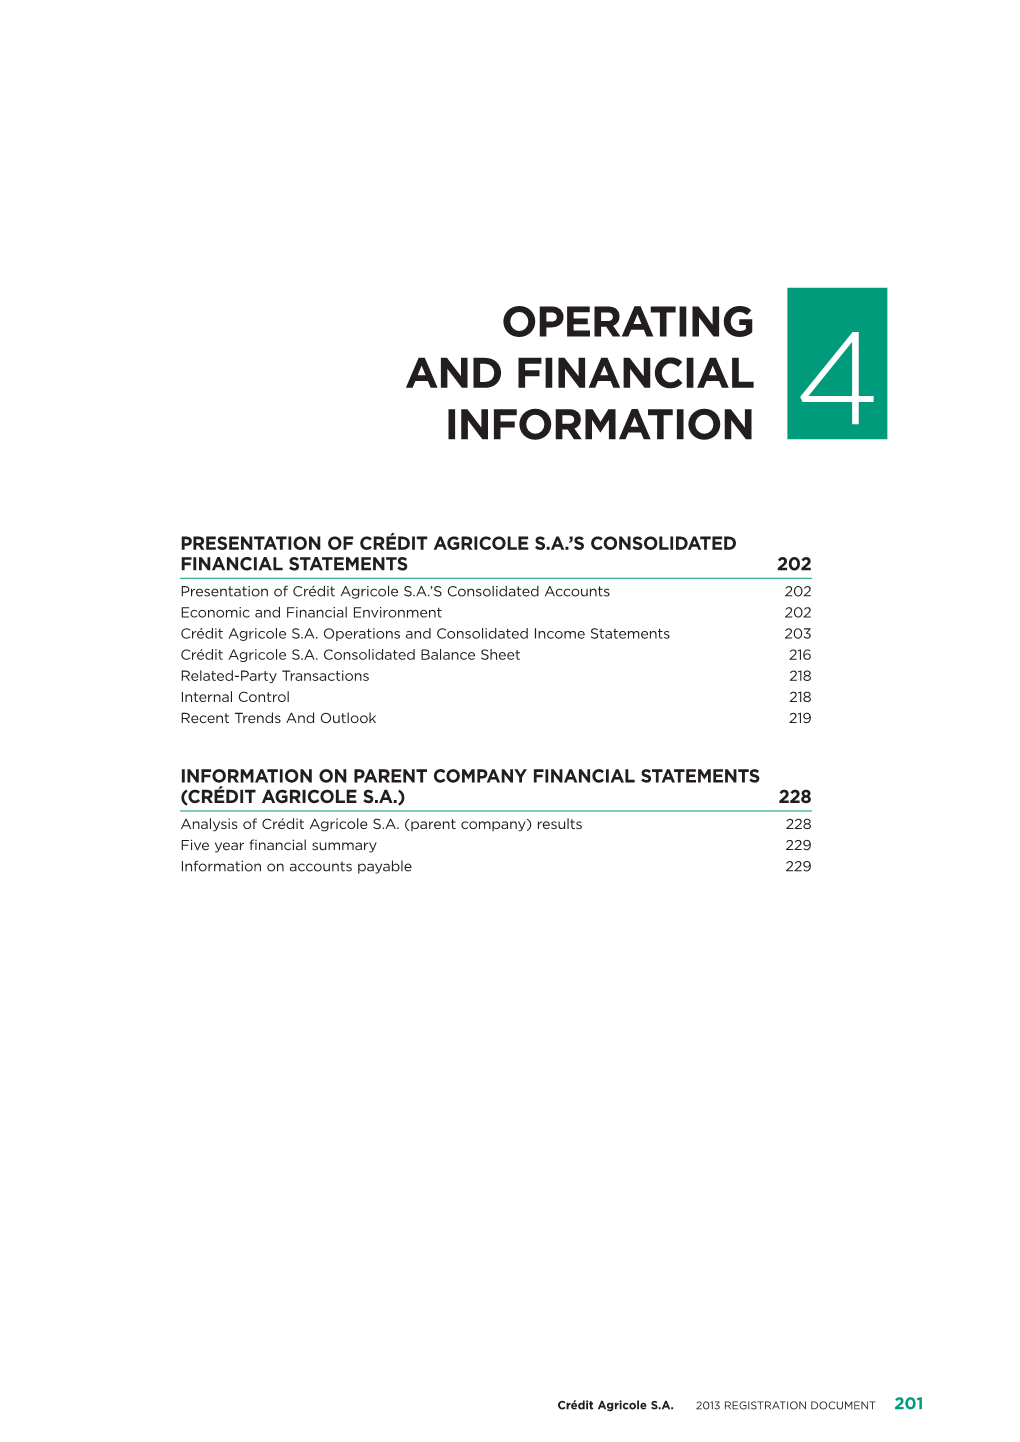 Operating and Financial Information 4